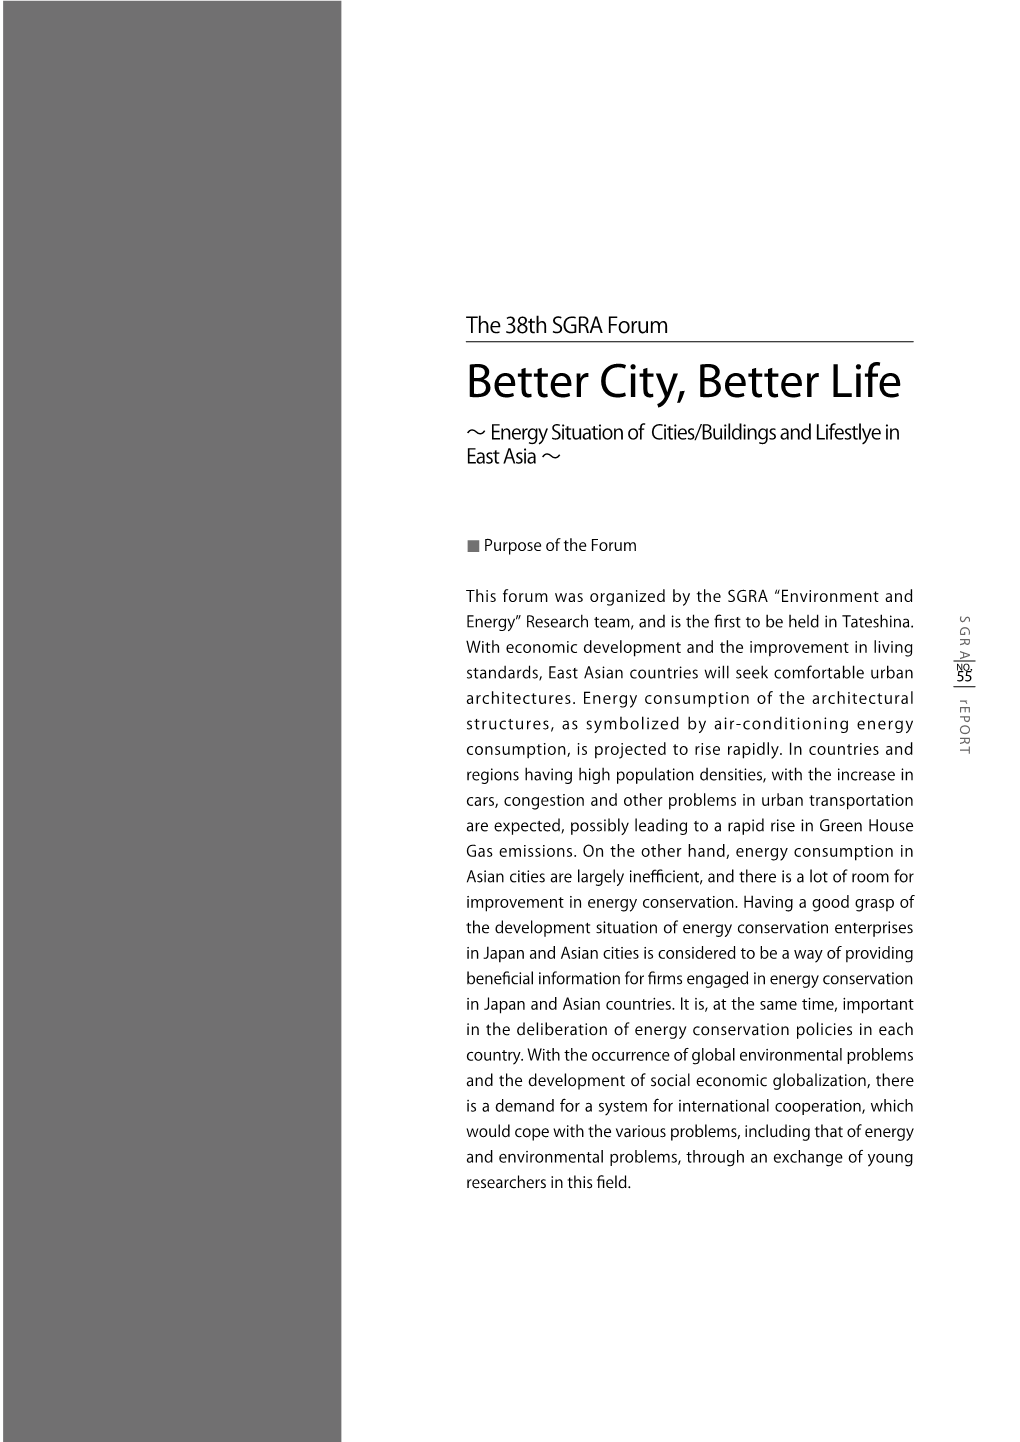 Better City, Better Life ~ENERGY SITUATION in CITIES/BUILDINGS and LIFESTYLE in EAST ASIA